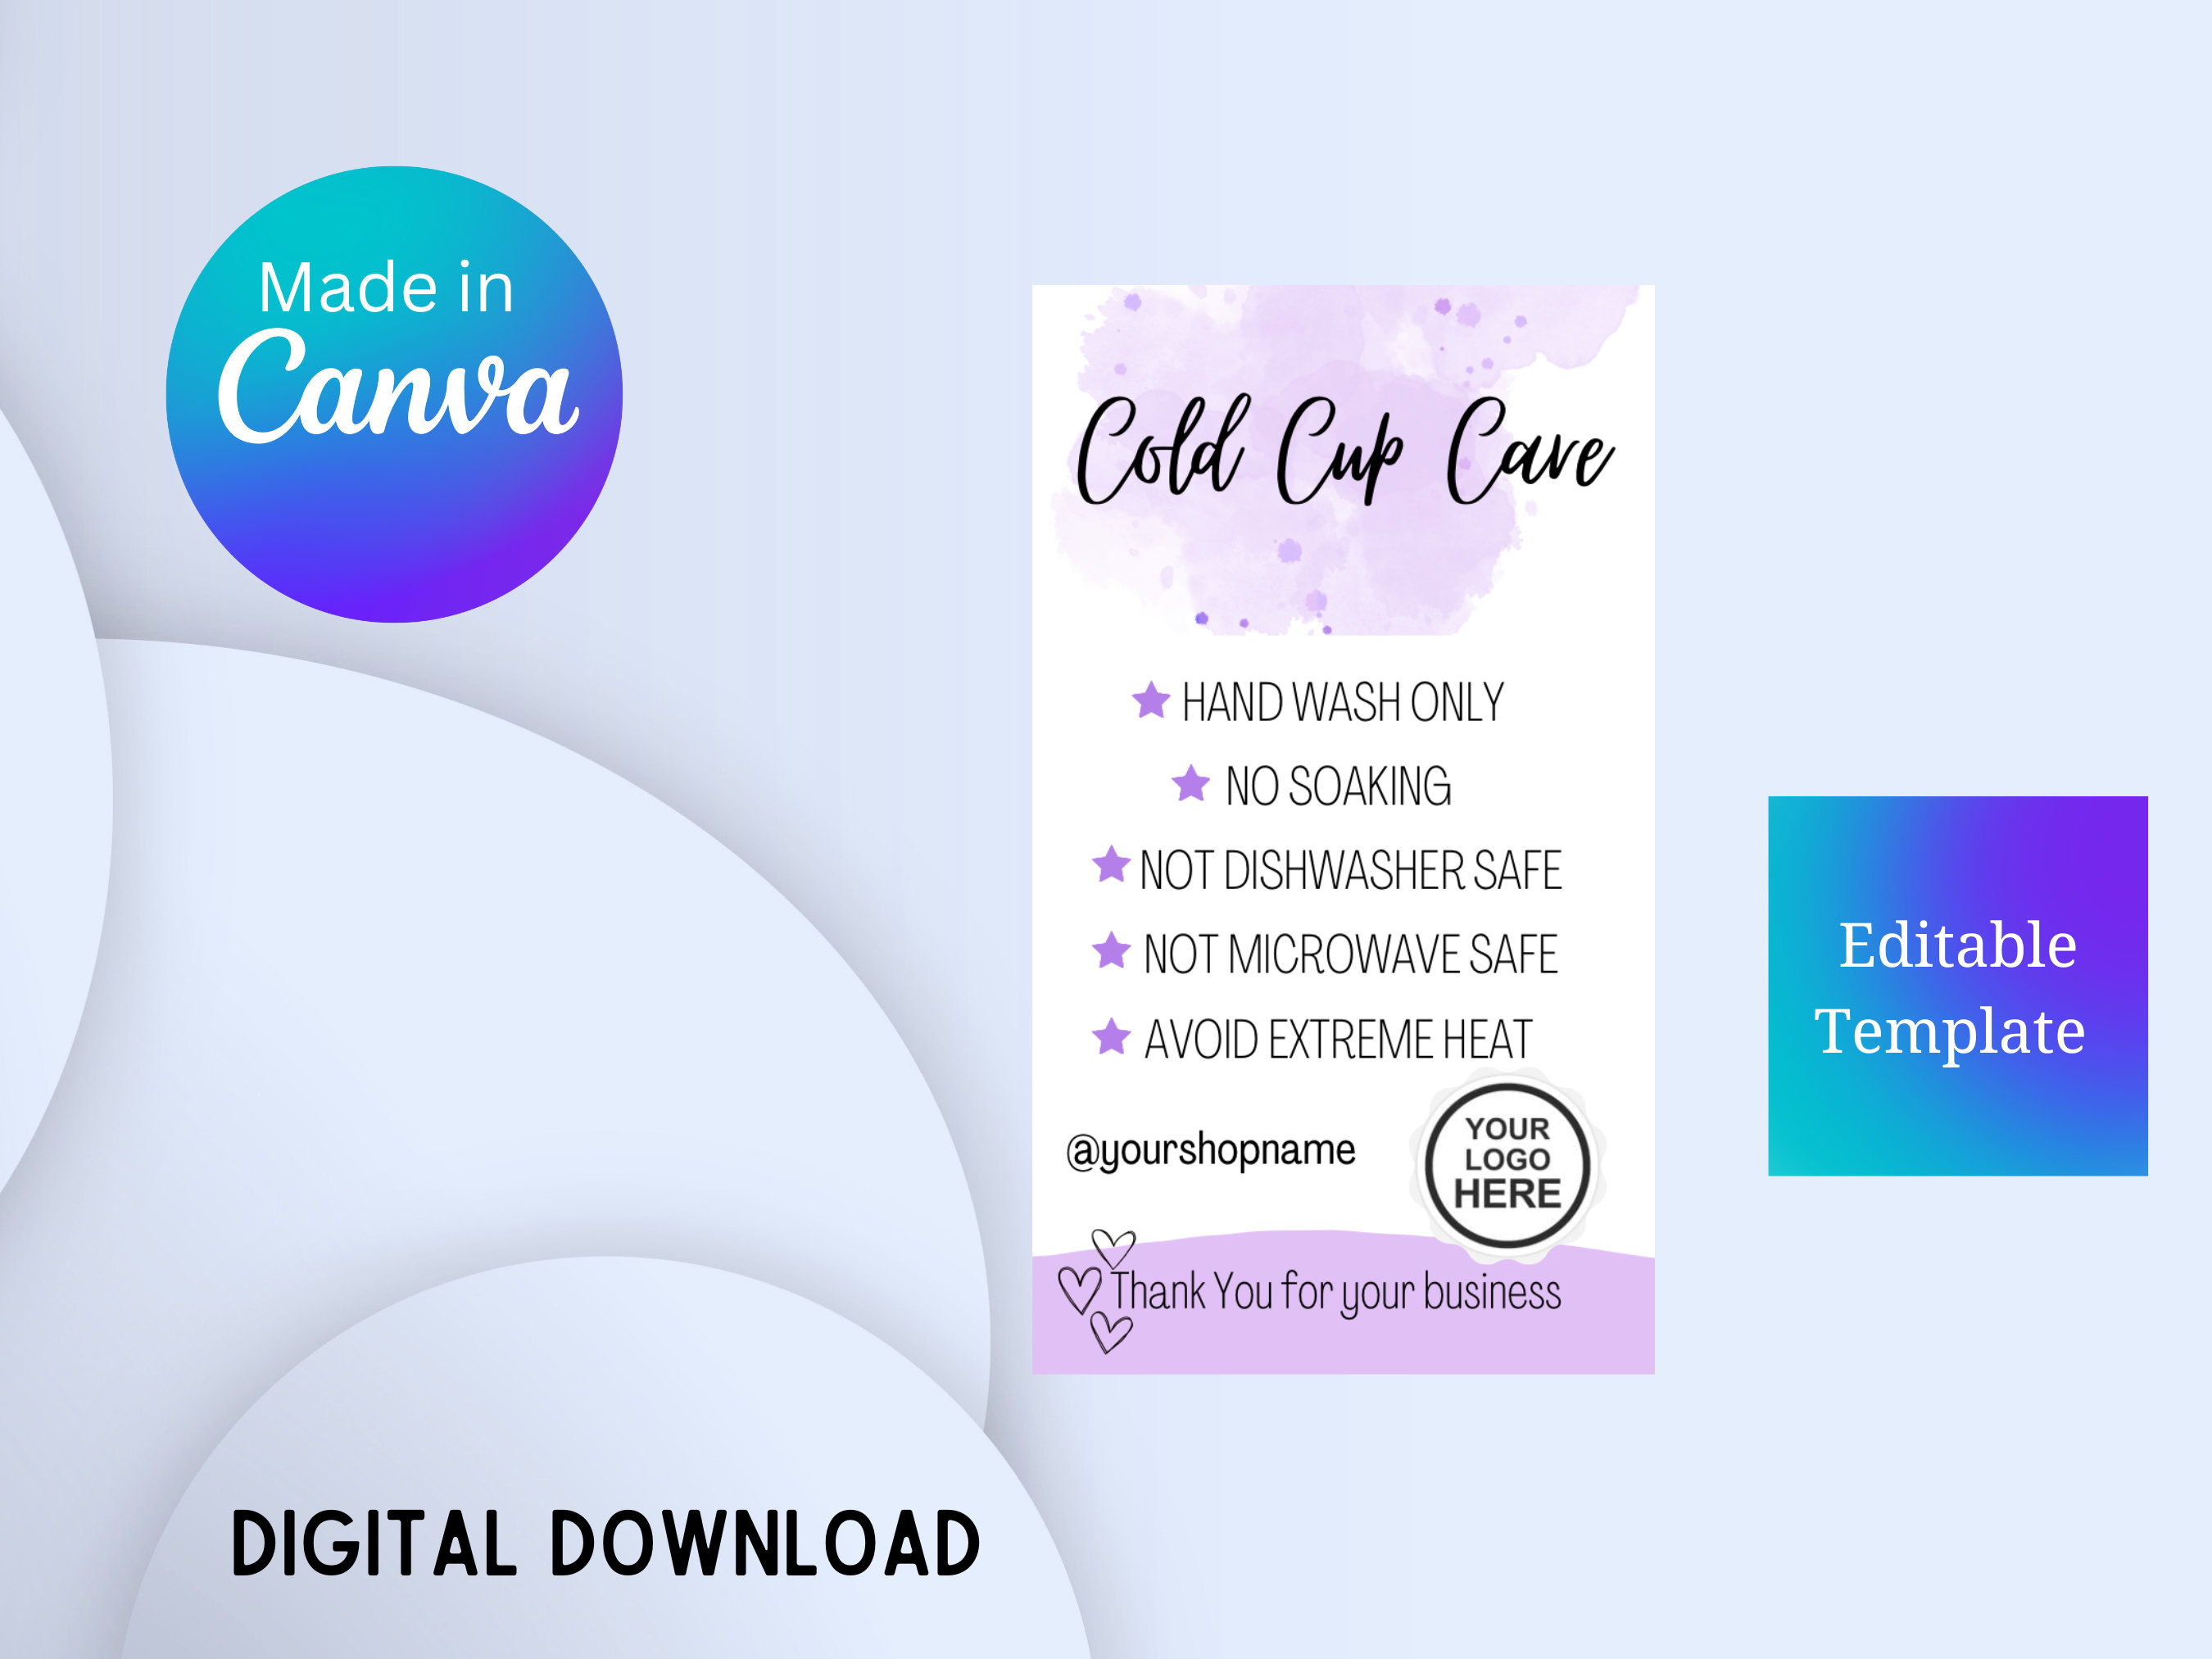 Cold Cup Printable Care Cards - Printable Care Instructions, Print